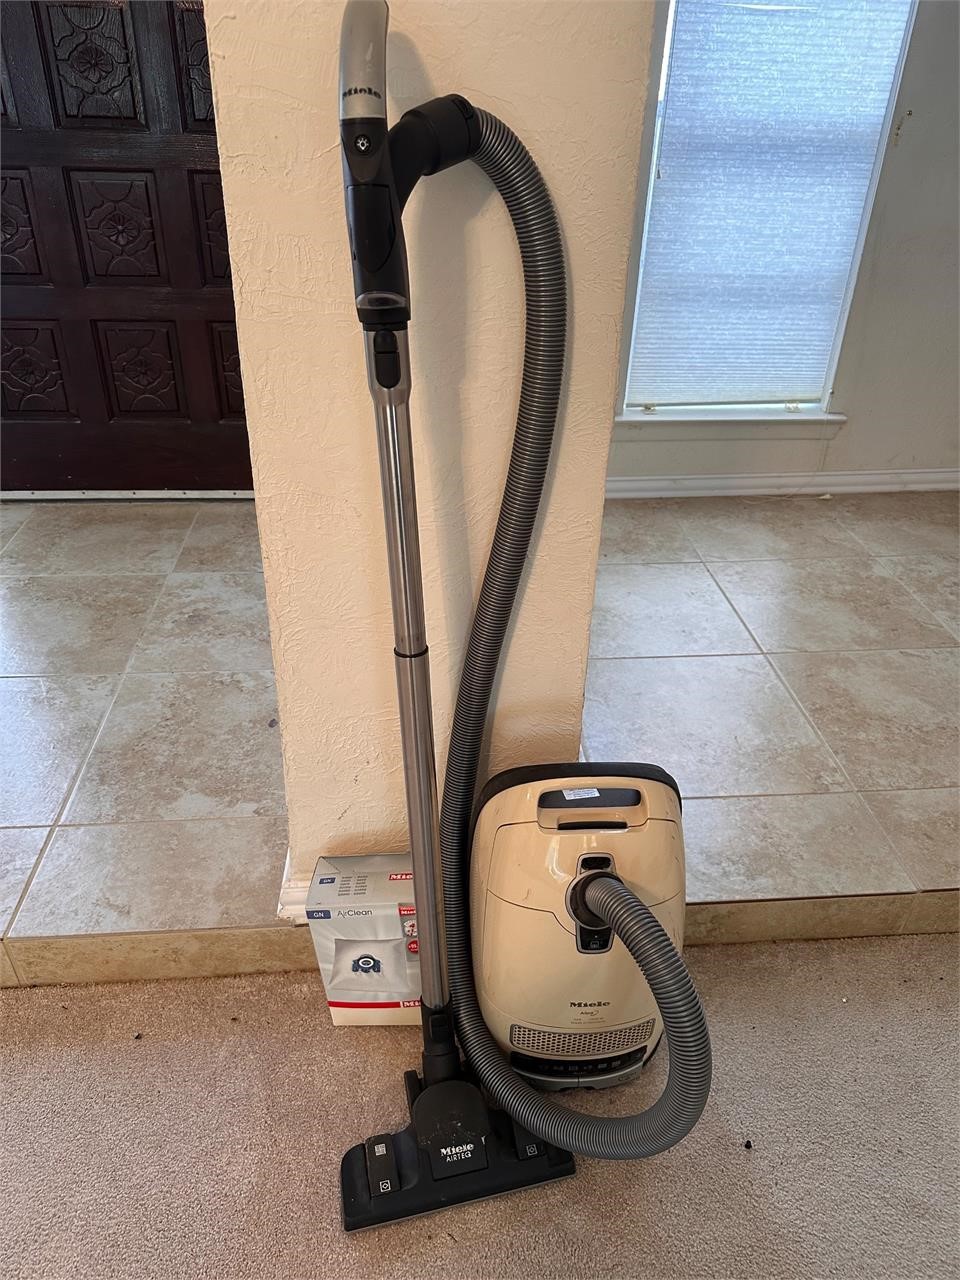 Miele Alize vacuum cleaner